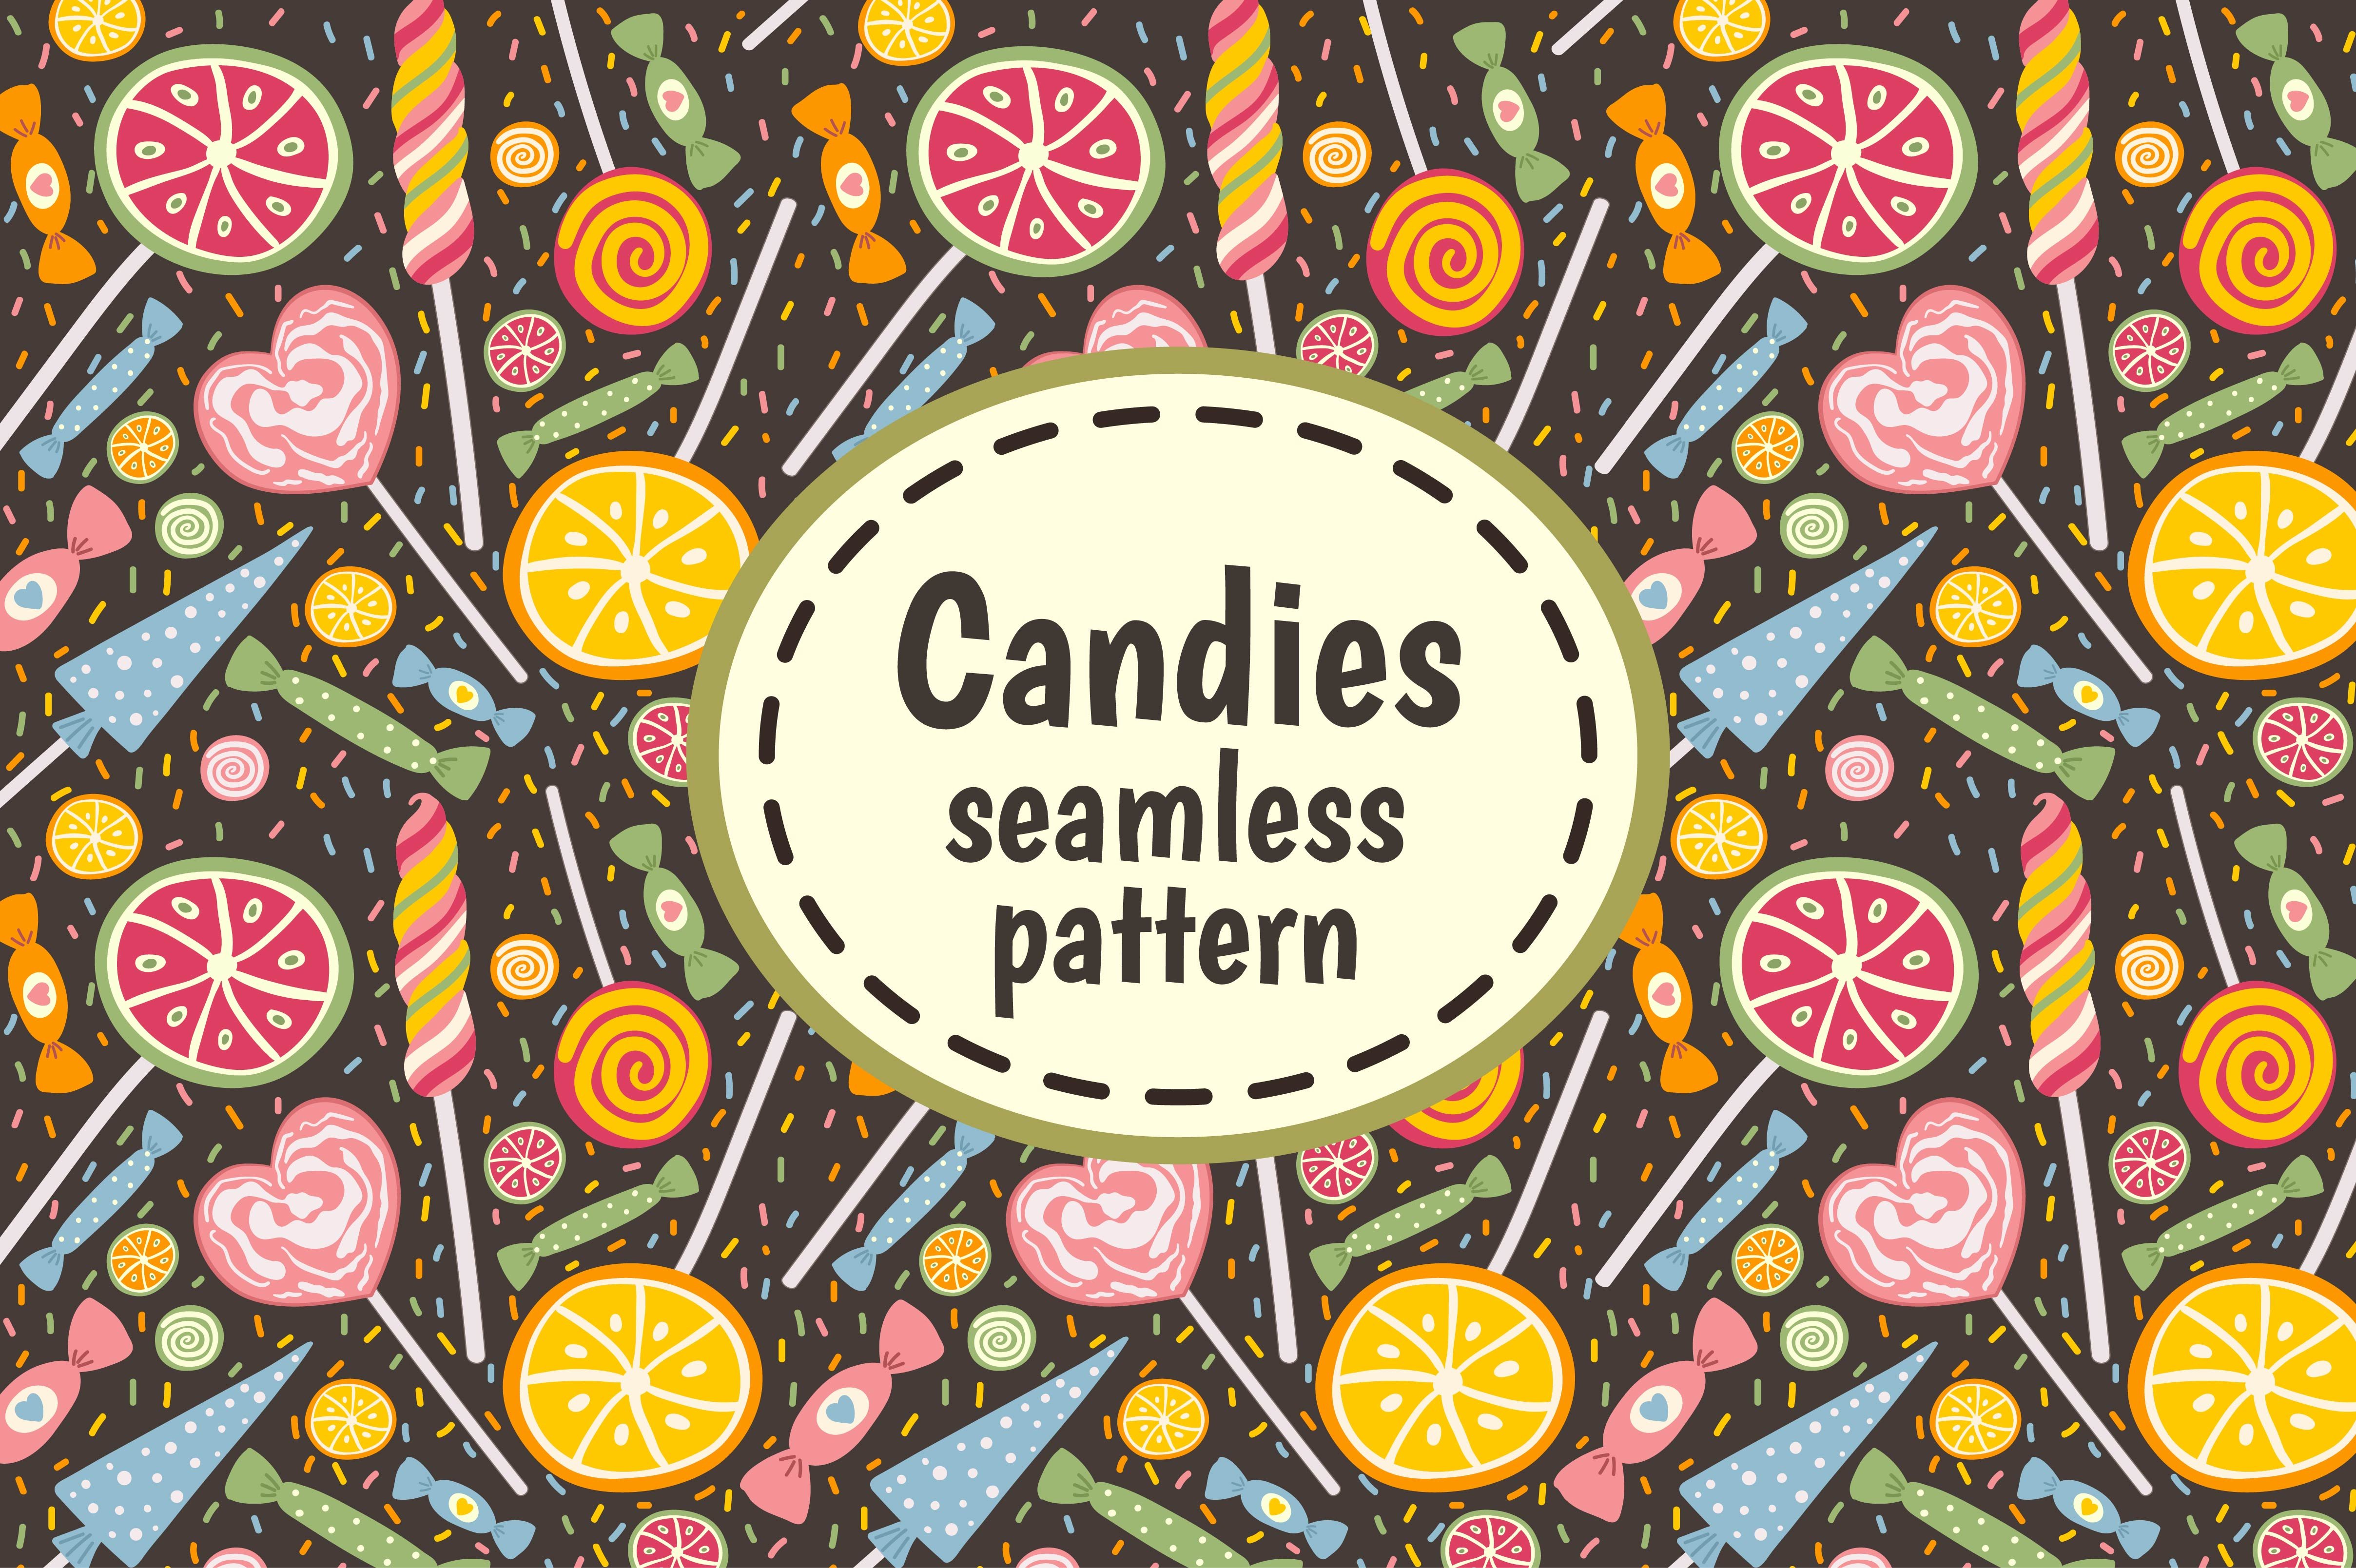 Candies and Sweets. Seamless pattern cover image.